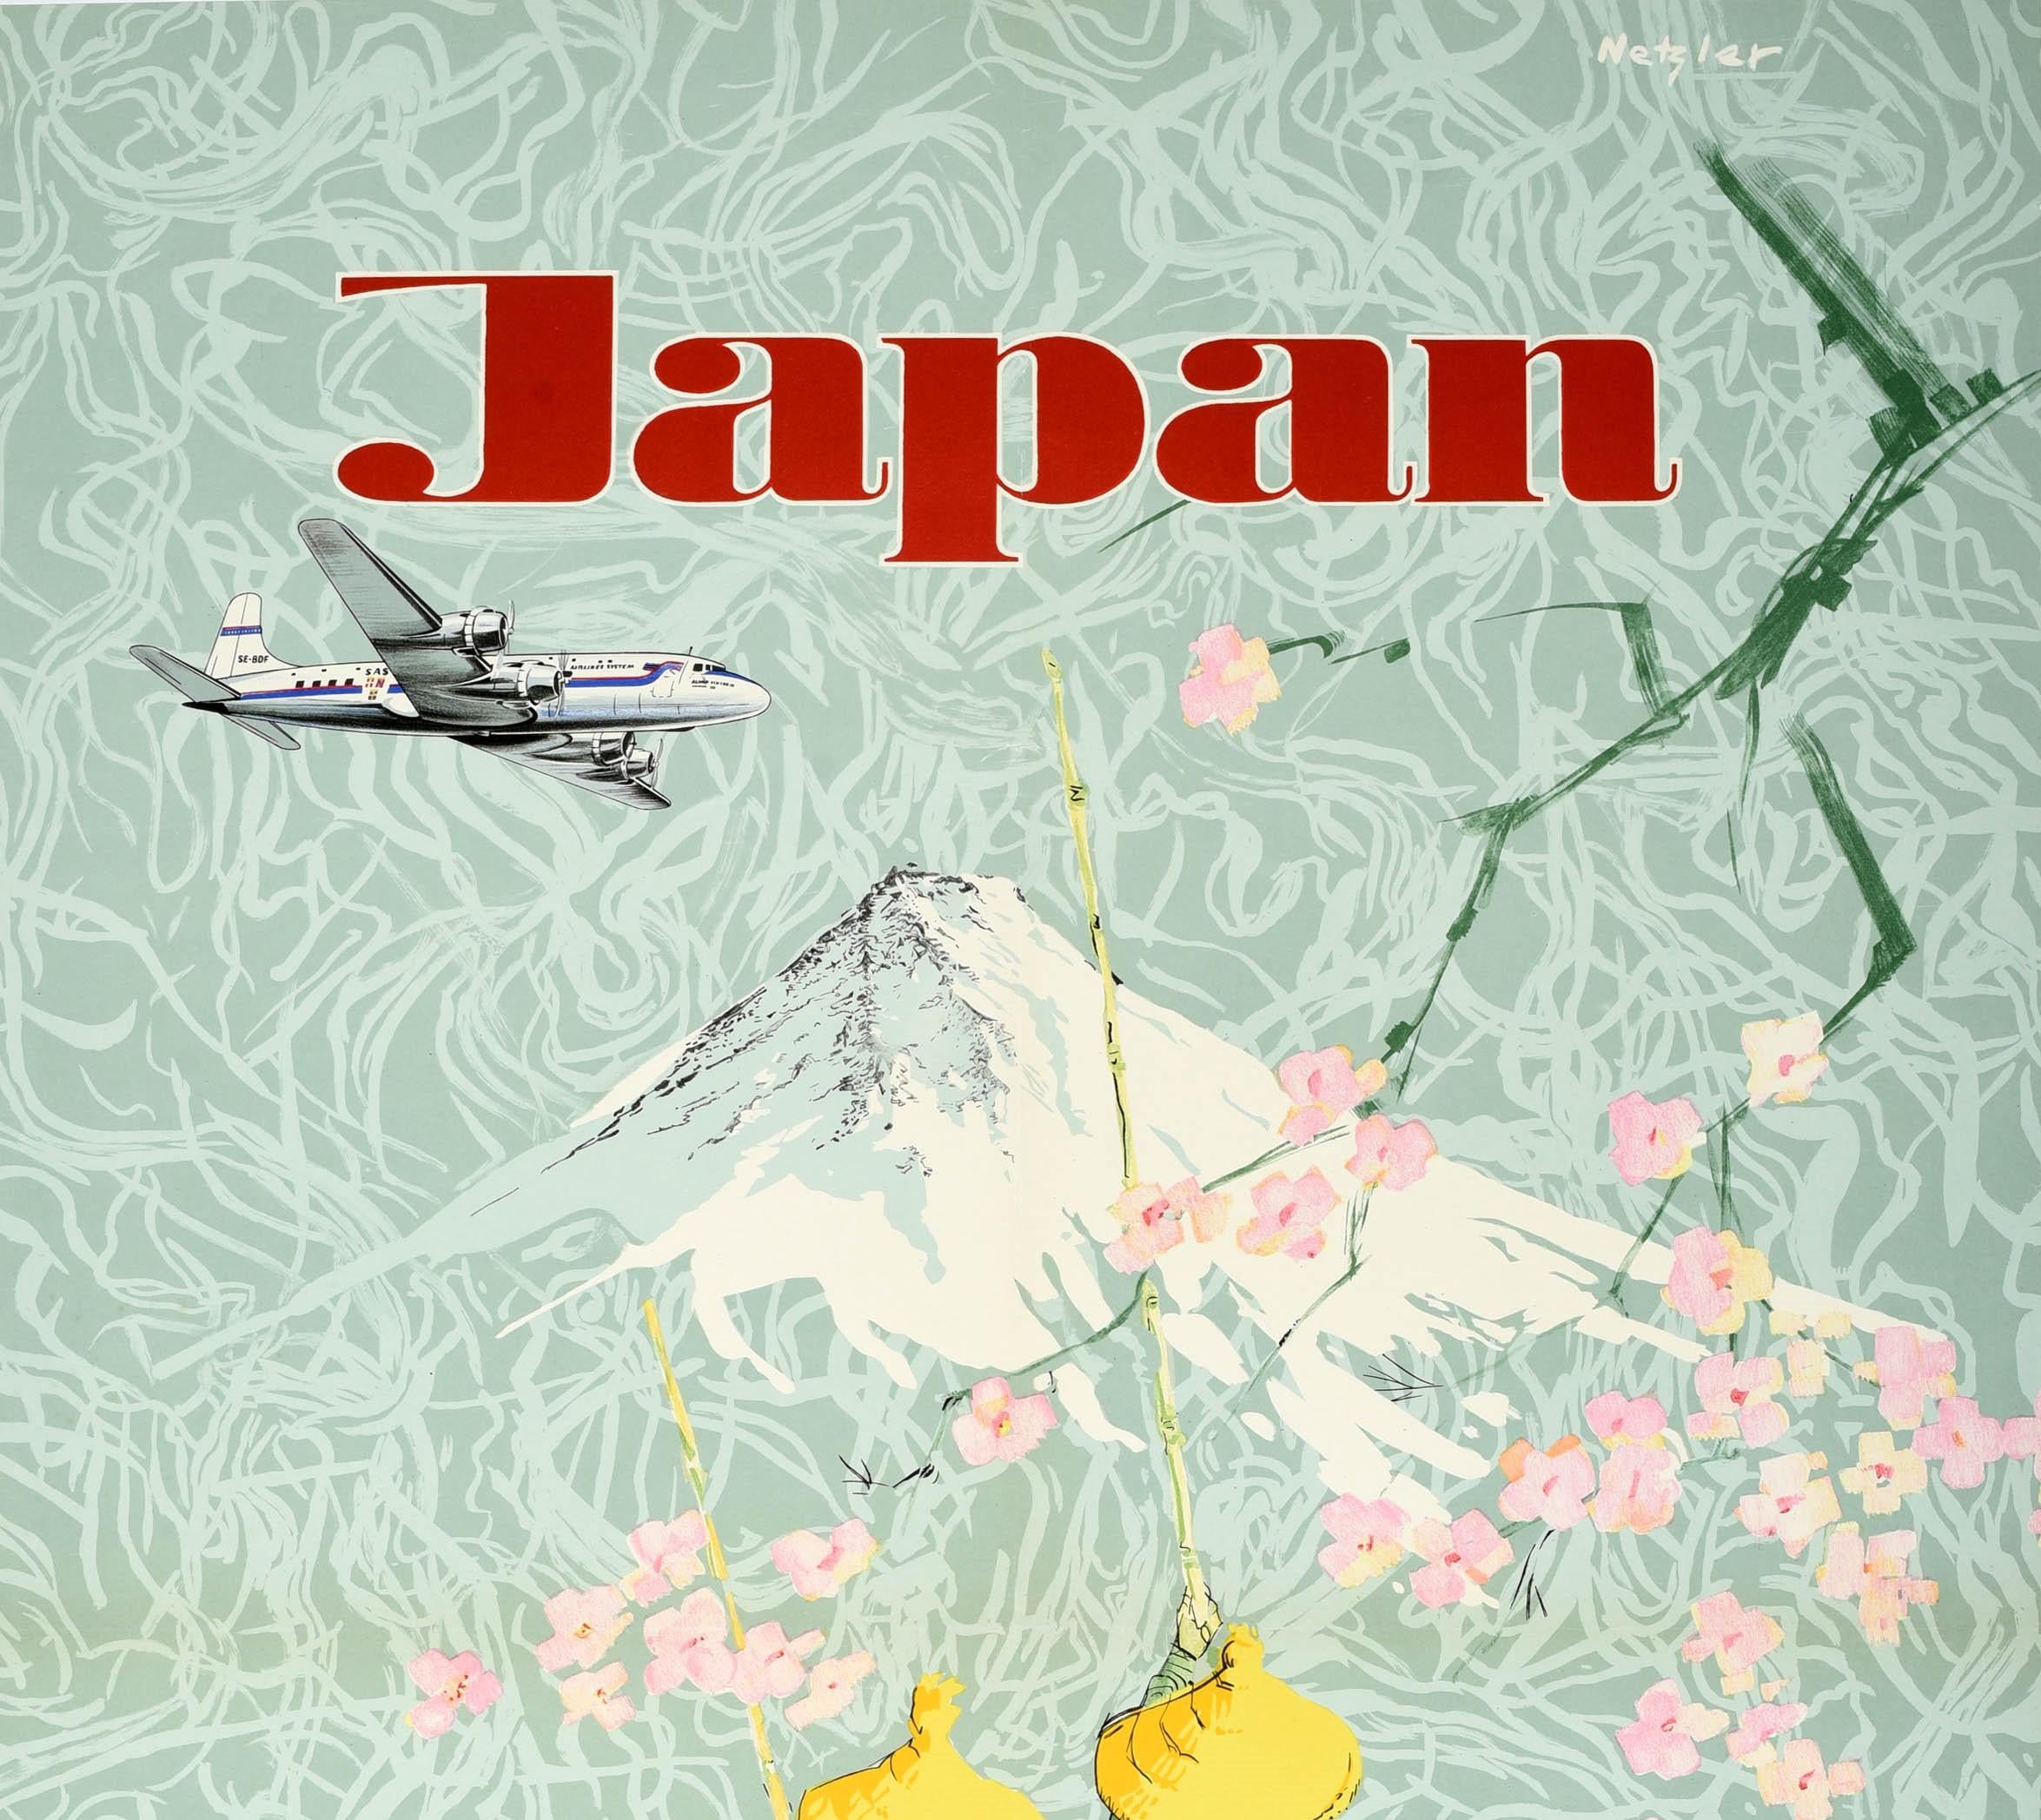 Original vintage travel poster for Japan issued by SAS Scandinavian Airline System (founded 1946) featuring colourful artwork by Kurt Netzler (1922-2006) of two people wearing traditional clothing and hats rowing a boat on a swirly background with a